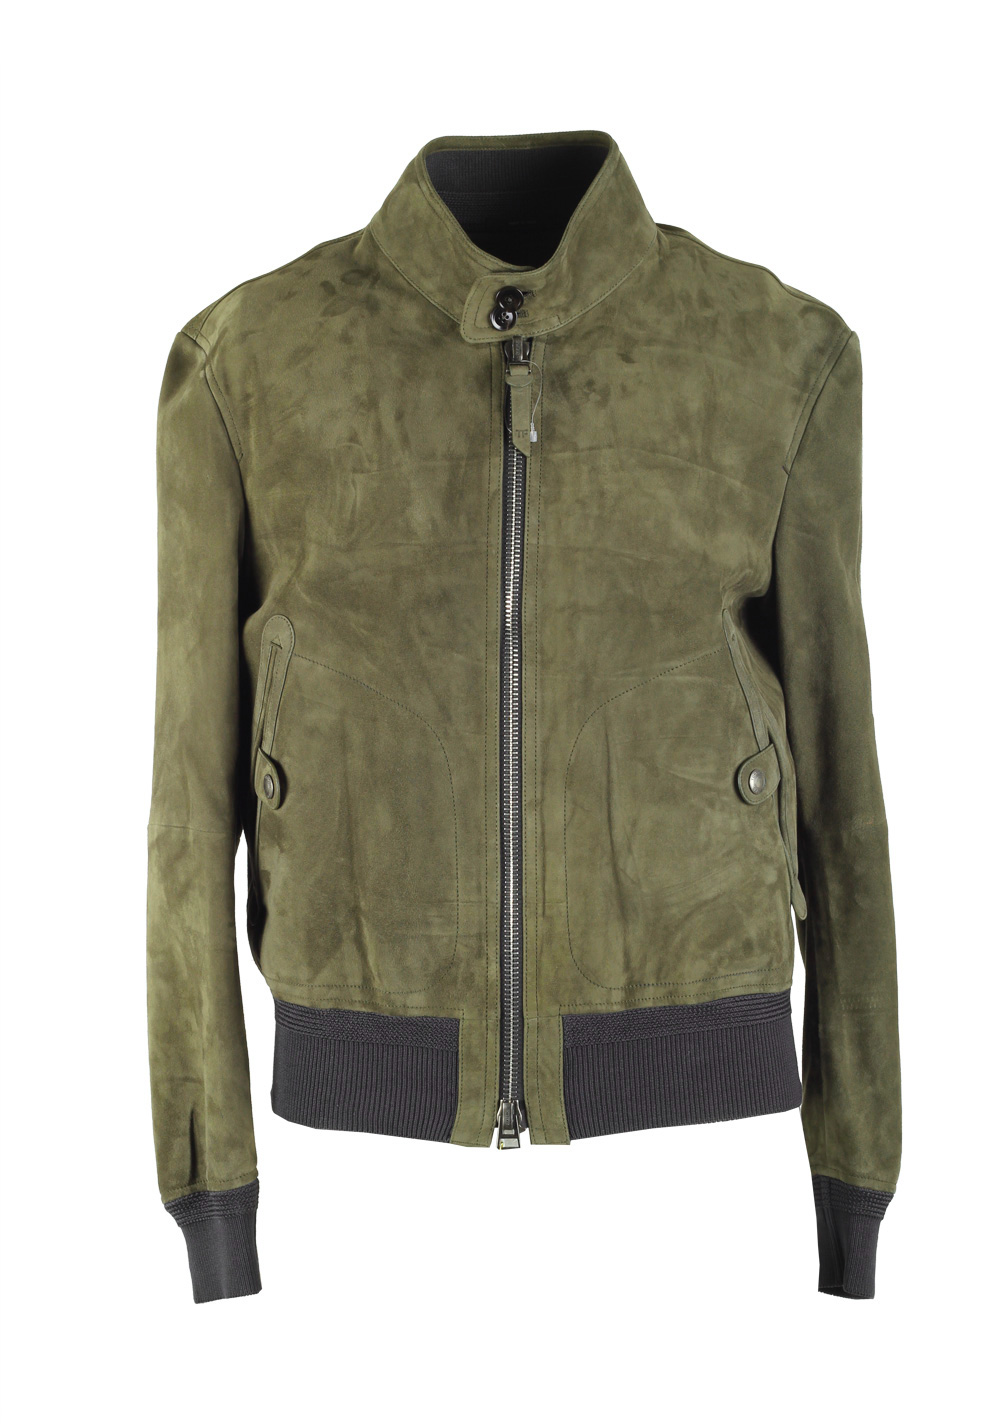 TOM FORD Green Lamb Leather Suede Jacket Coat Size 54 / 44R U.S ...